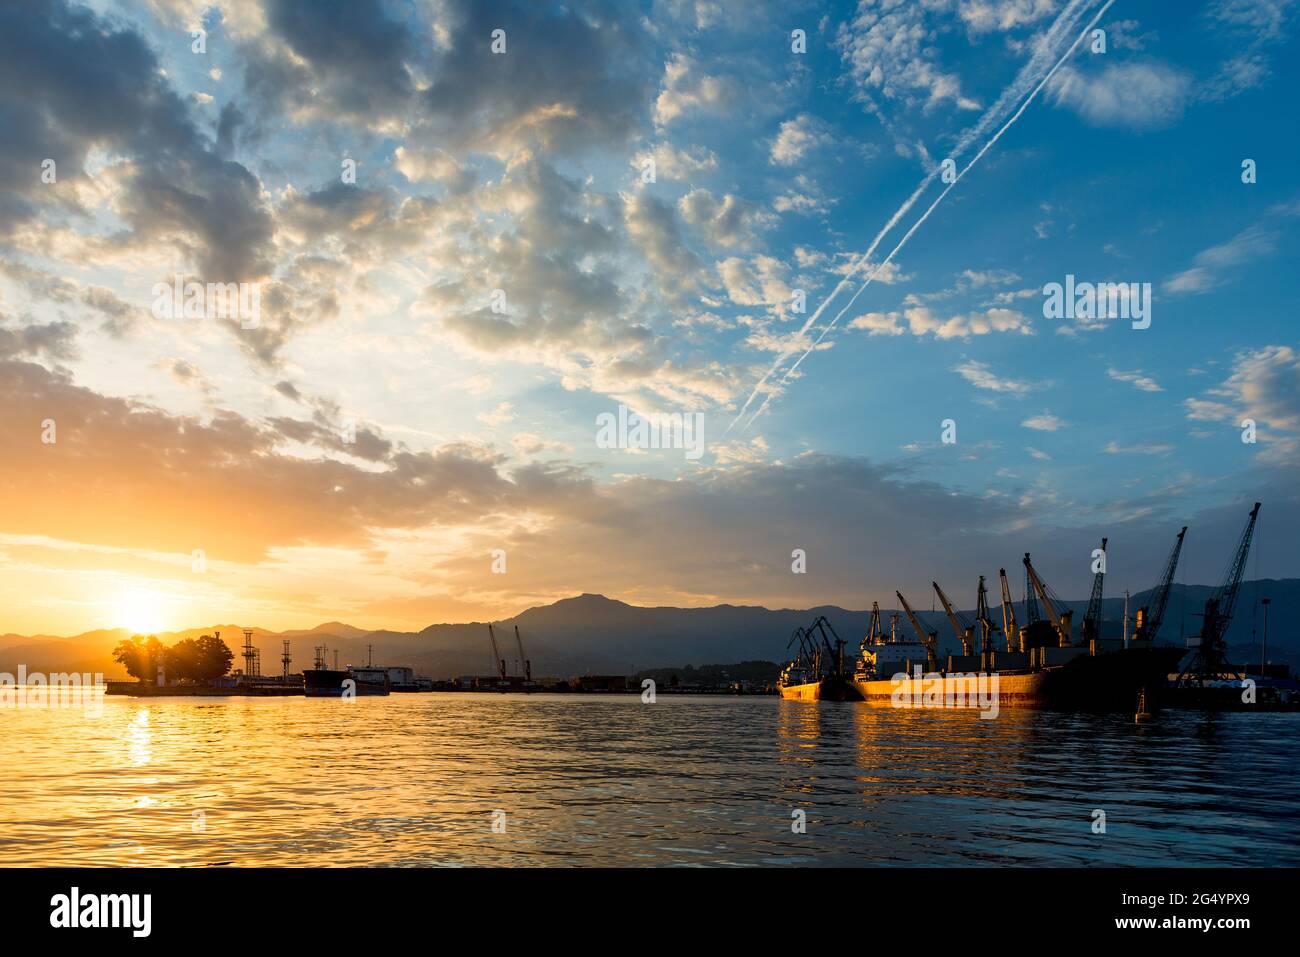 seaport and cargo cranes at sunse Stock Photo